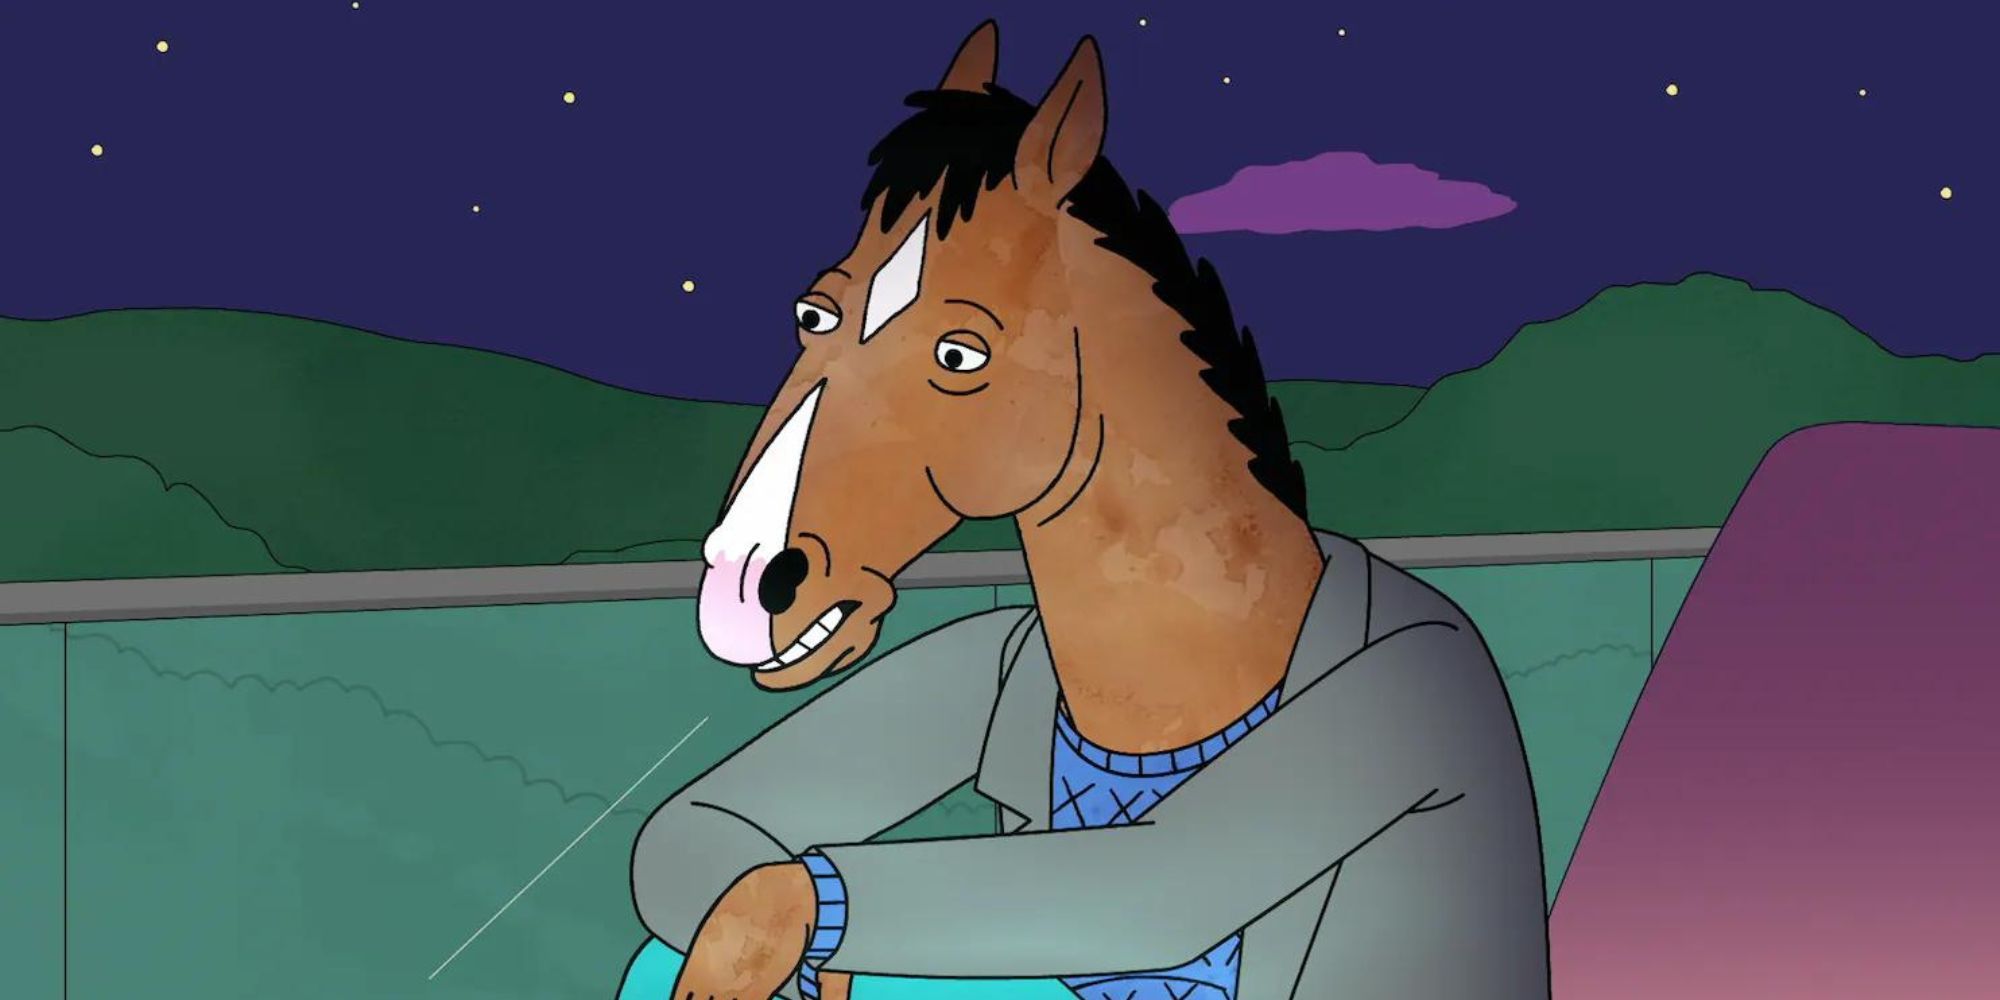 Bojack from Bojack Horseman sits sadly on his couch.